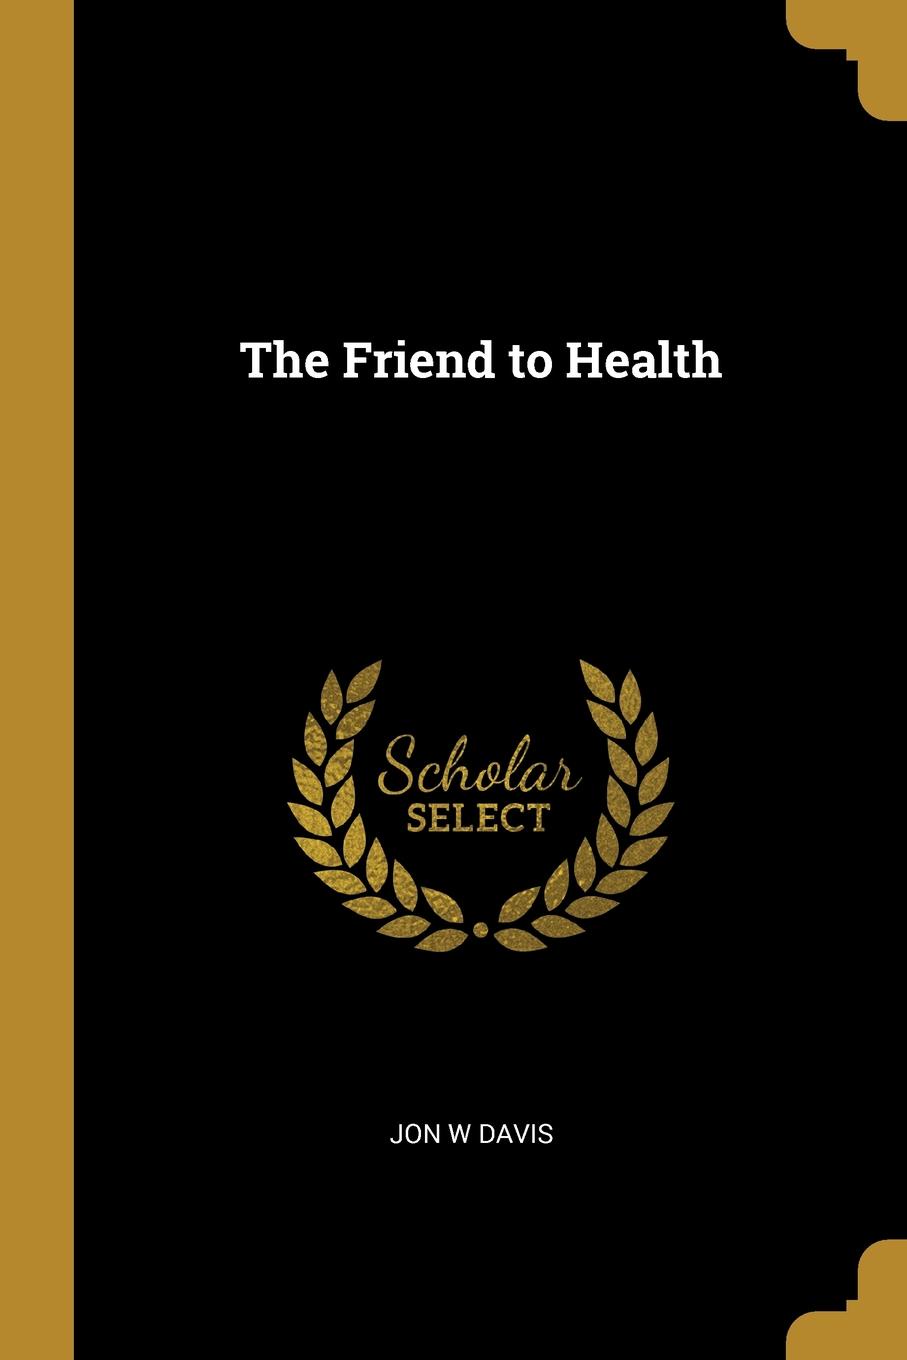 The Friend to Health